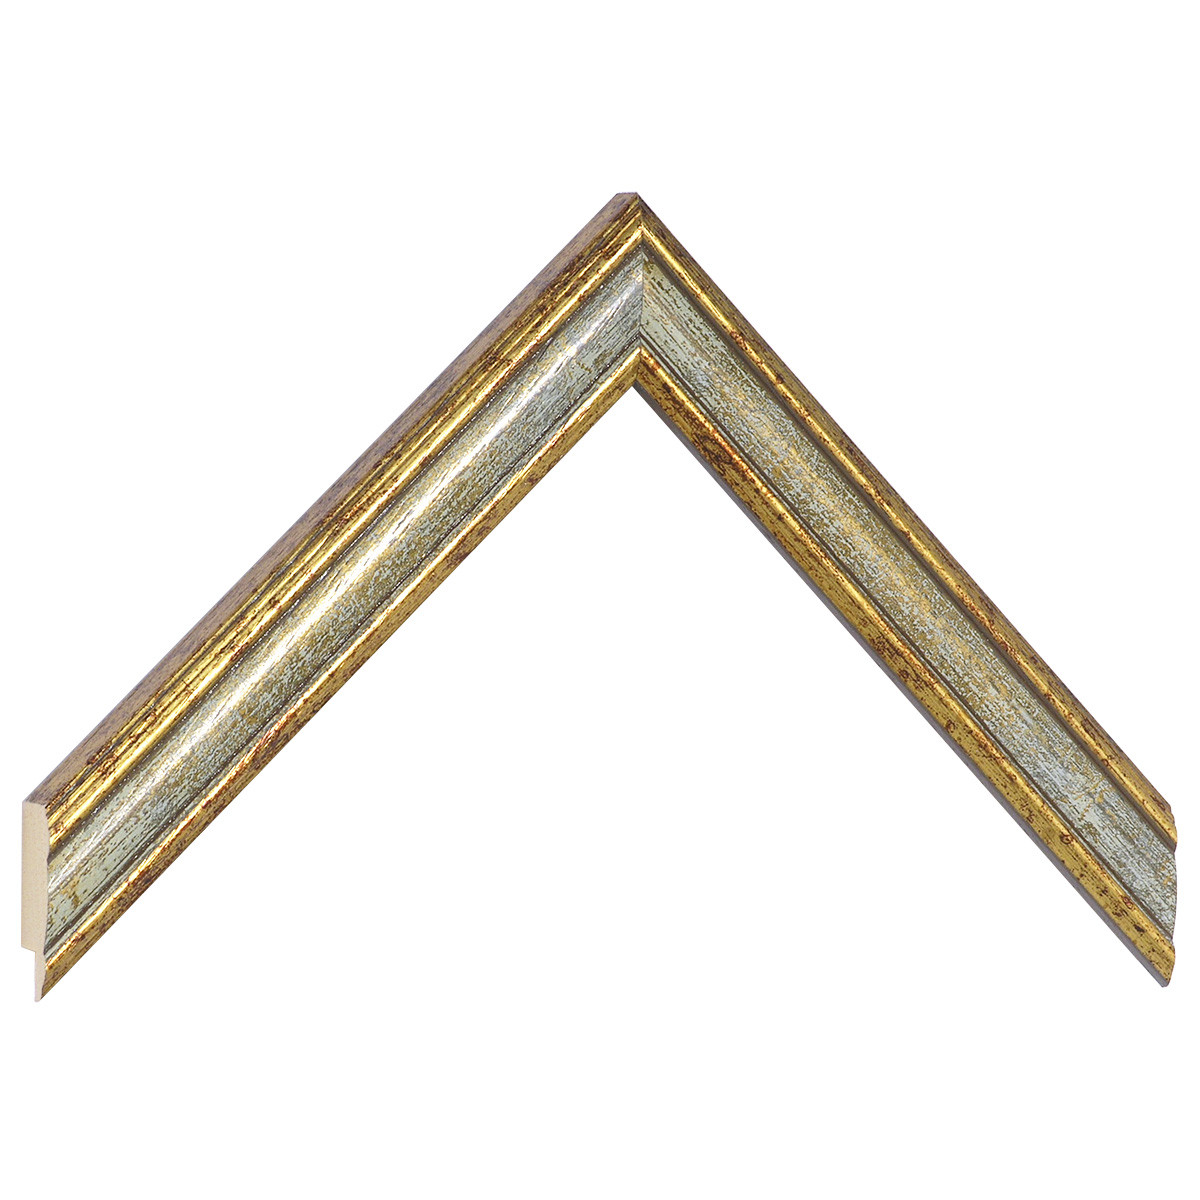 Moulding ayous width 24mm - antique gold with white band - Sample